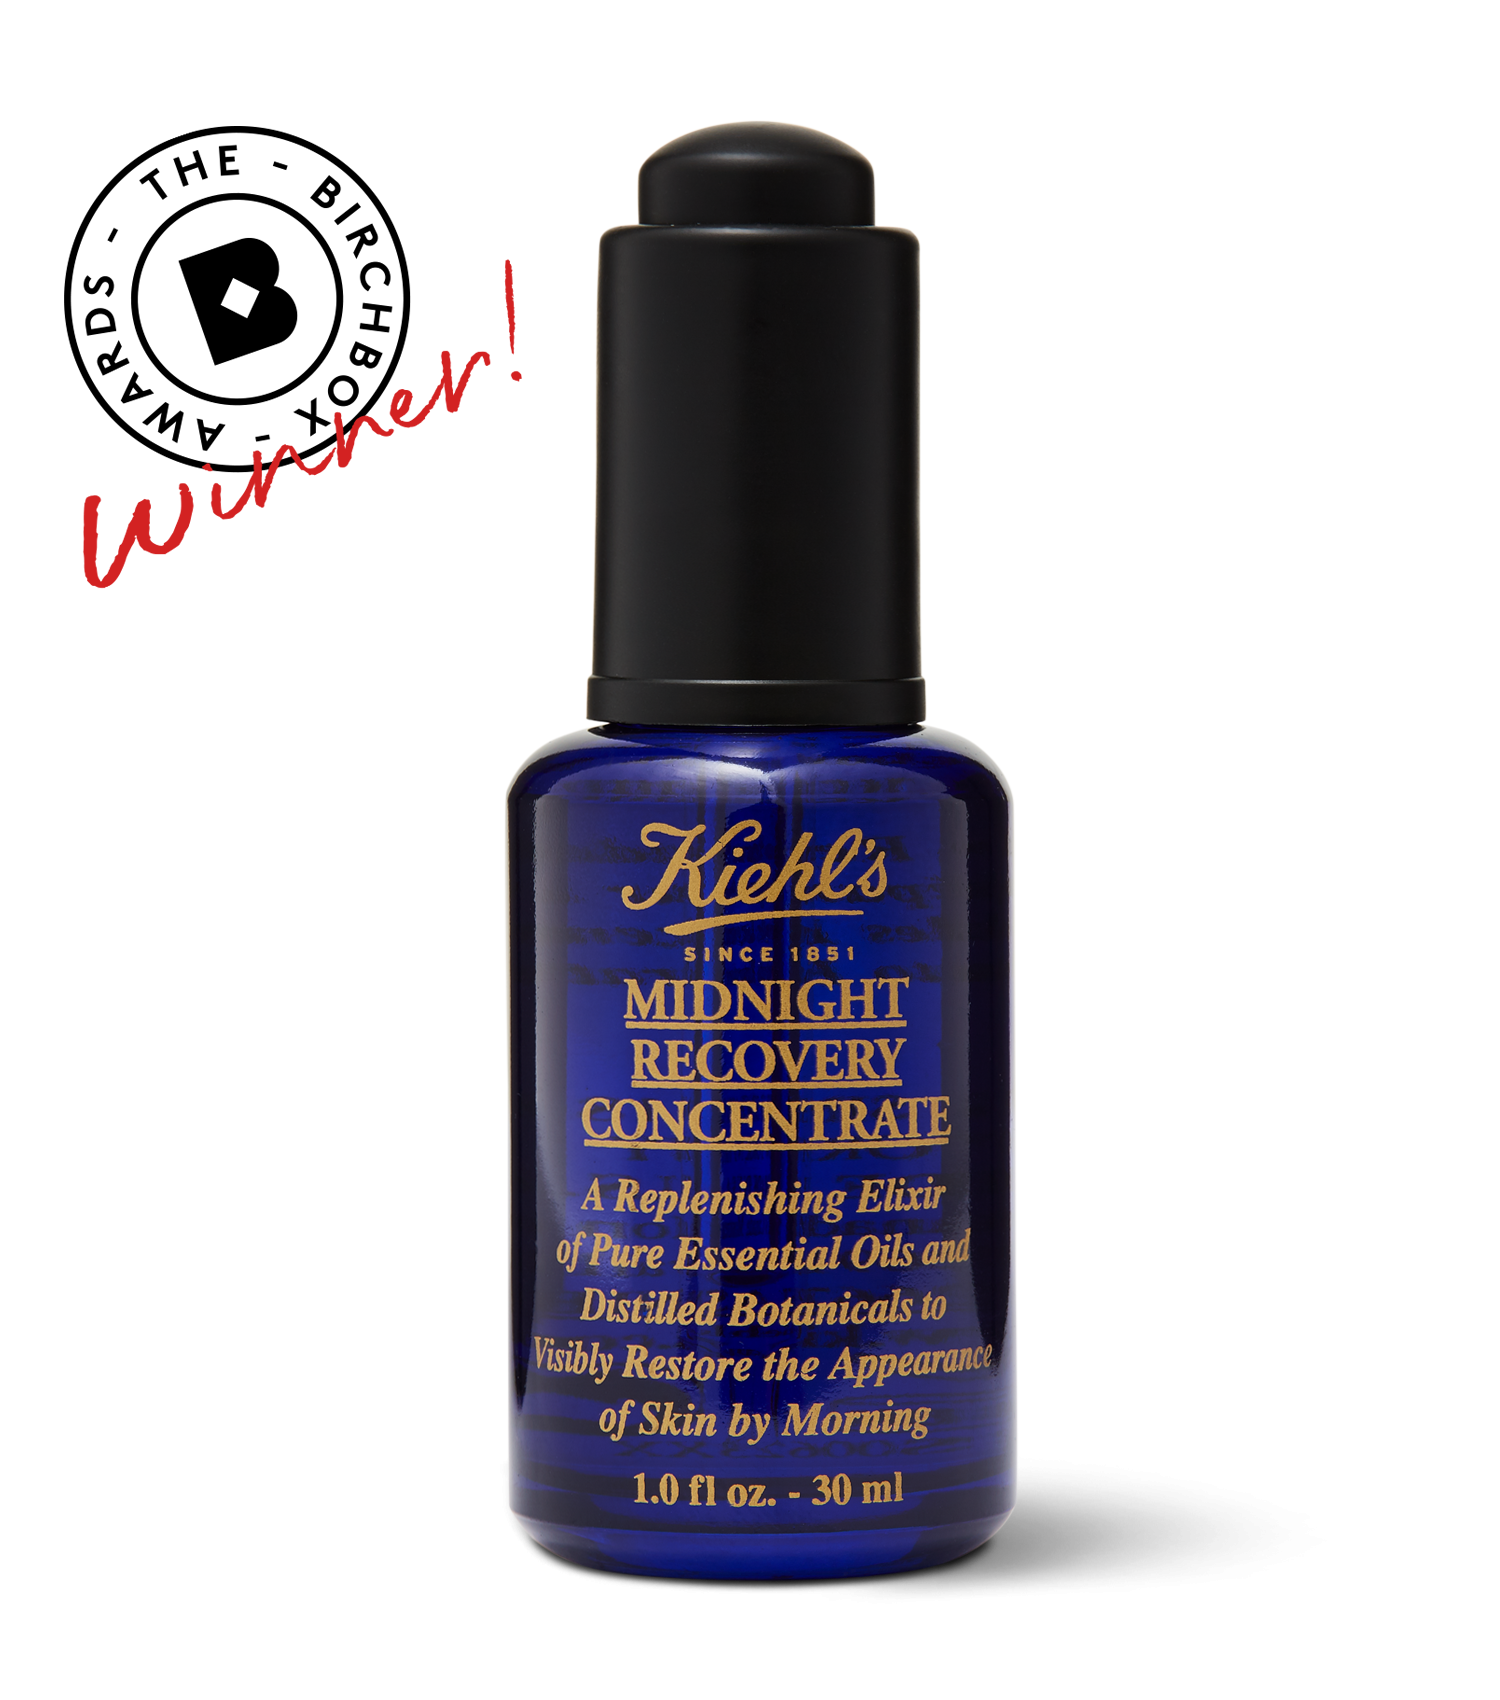 Kiehl's Midnight Recovery Concentrate  1